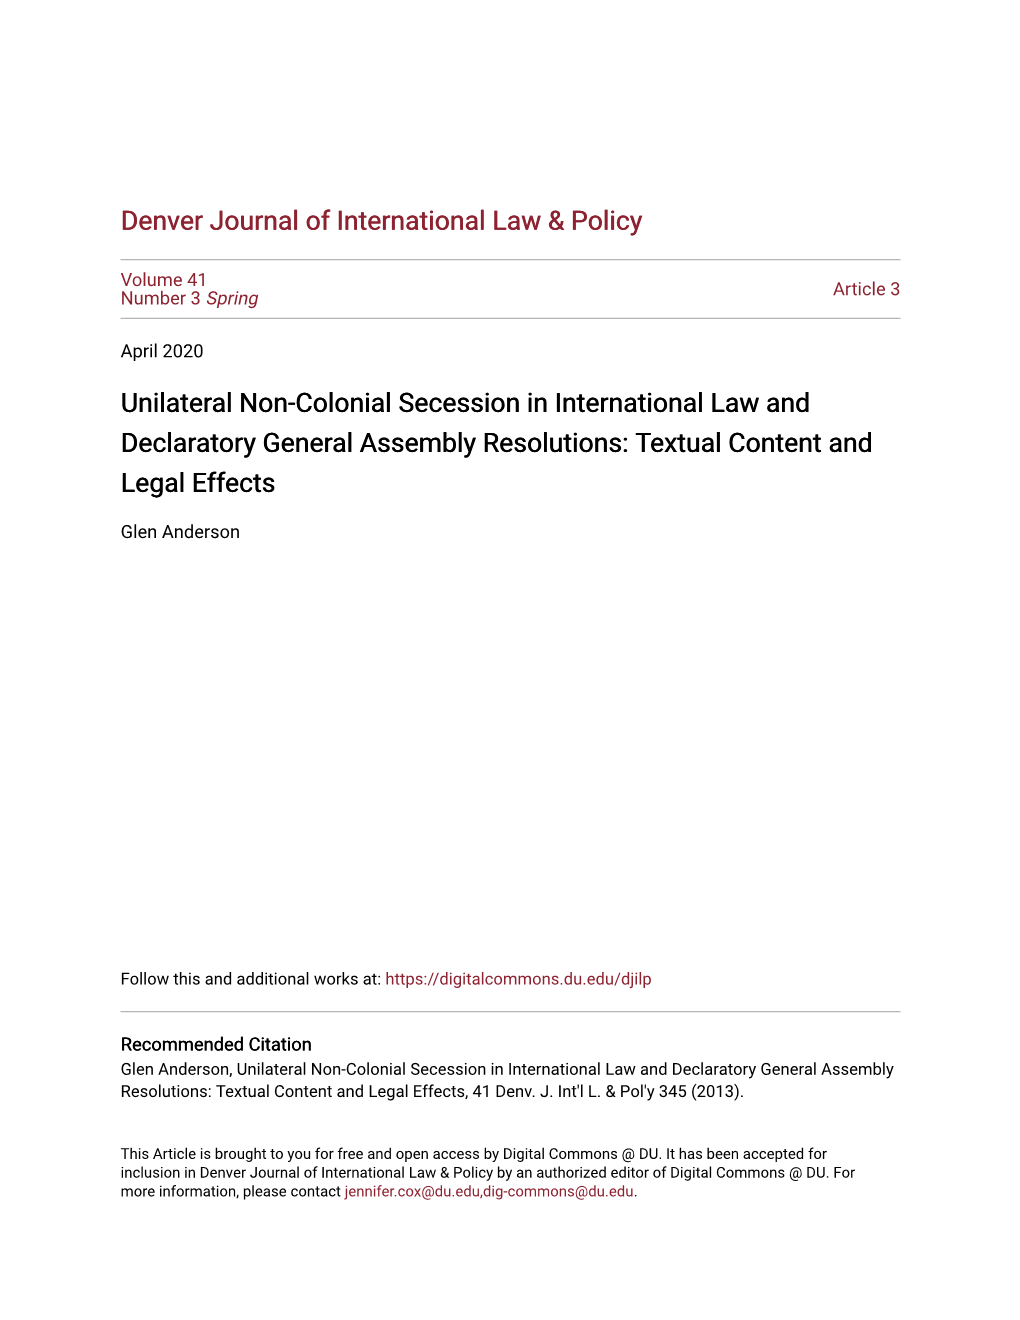 Unilateral Non-Colonial Secession in International Law and Declaratory General Assembly Resolutions: Textual Content and Legal Effects